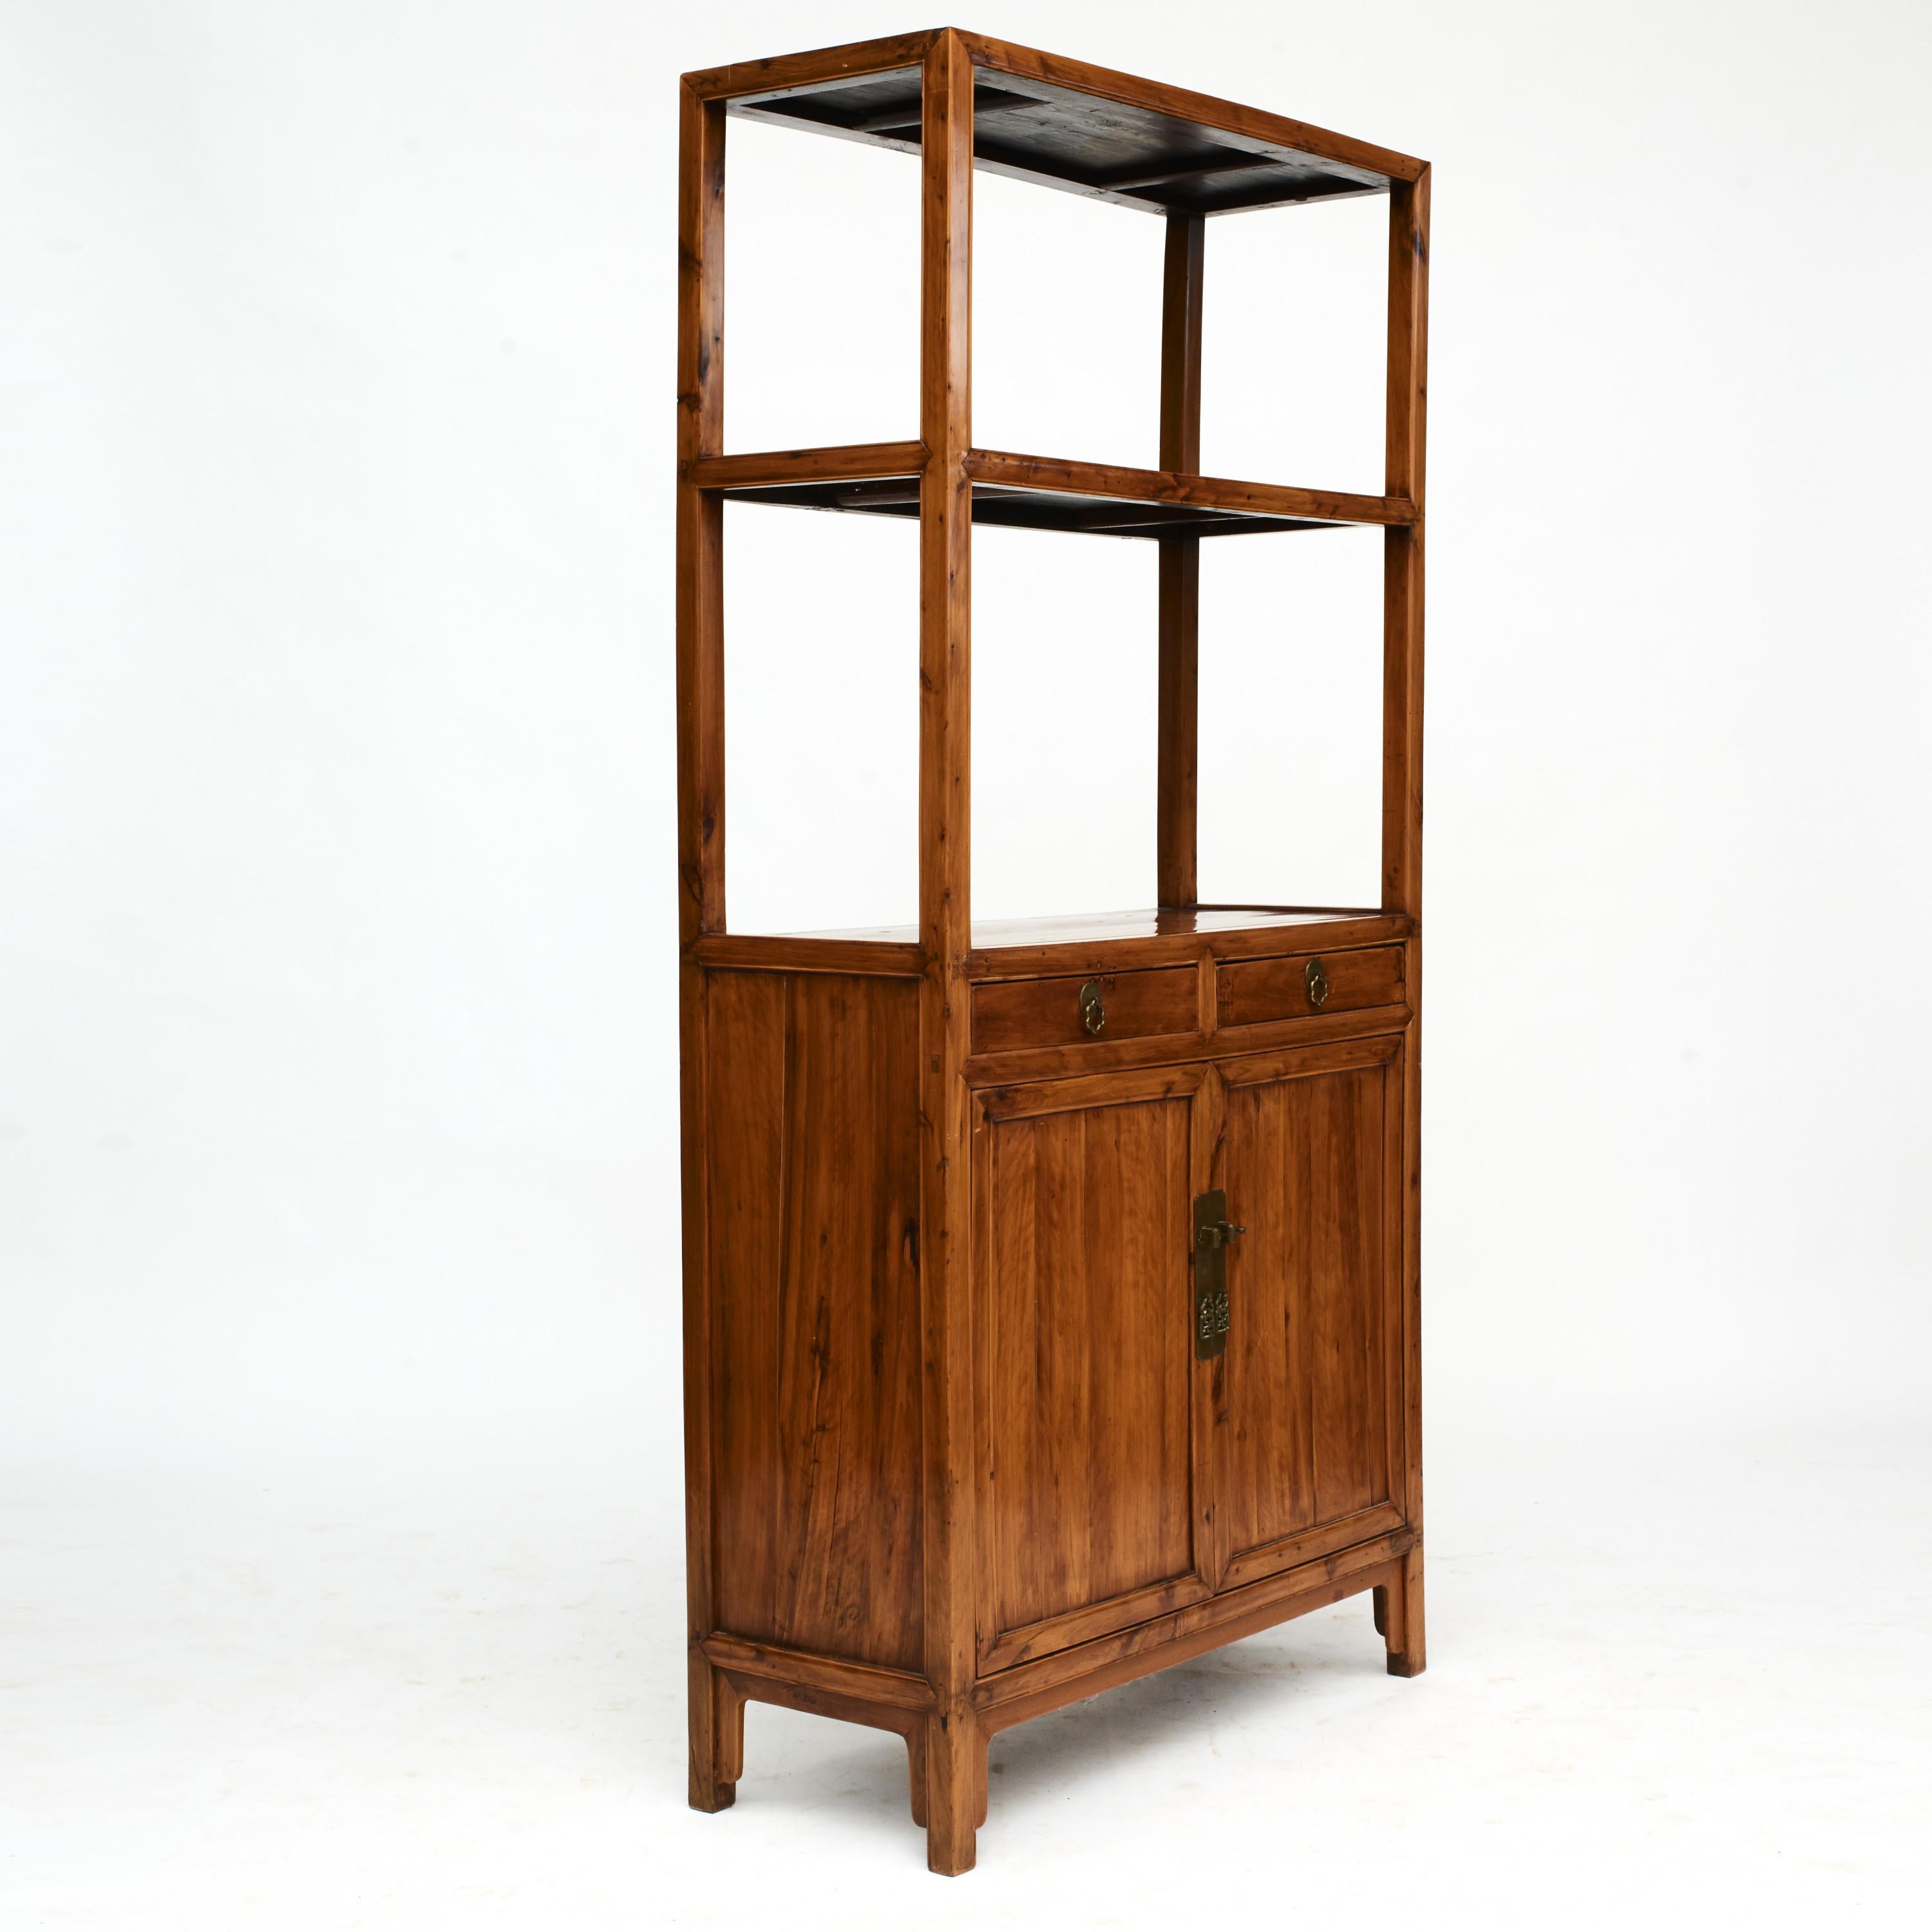 Bookcase made in peach wood. Pair of doors, 2 drawers and 2 shelves.
From Jiangsu Province 1840-1860.

Peach is a beautiful type of wood with warm undertones and lovely grain. Furnitures made in peach wood is relatively rare.
  